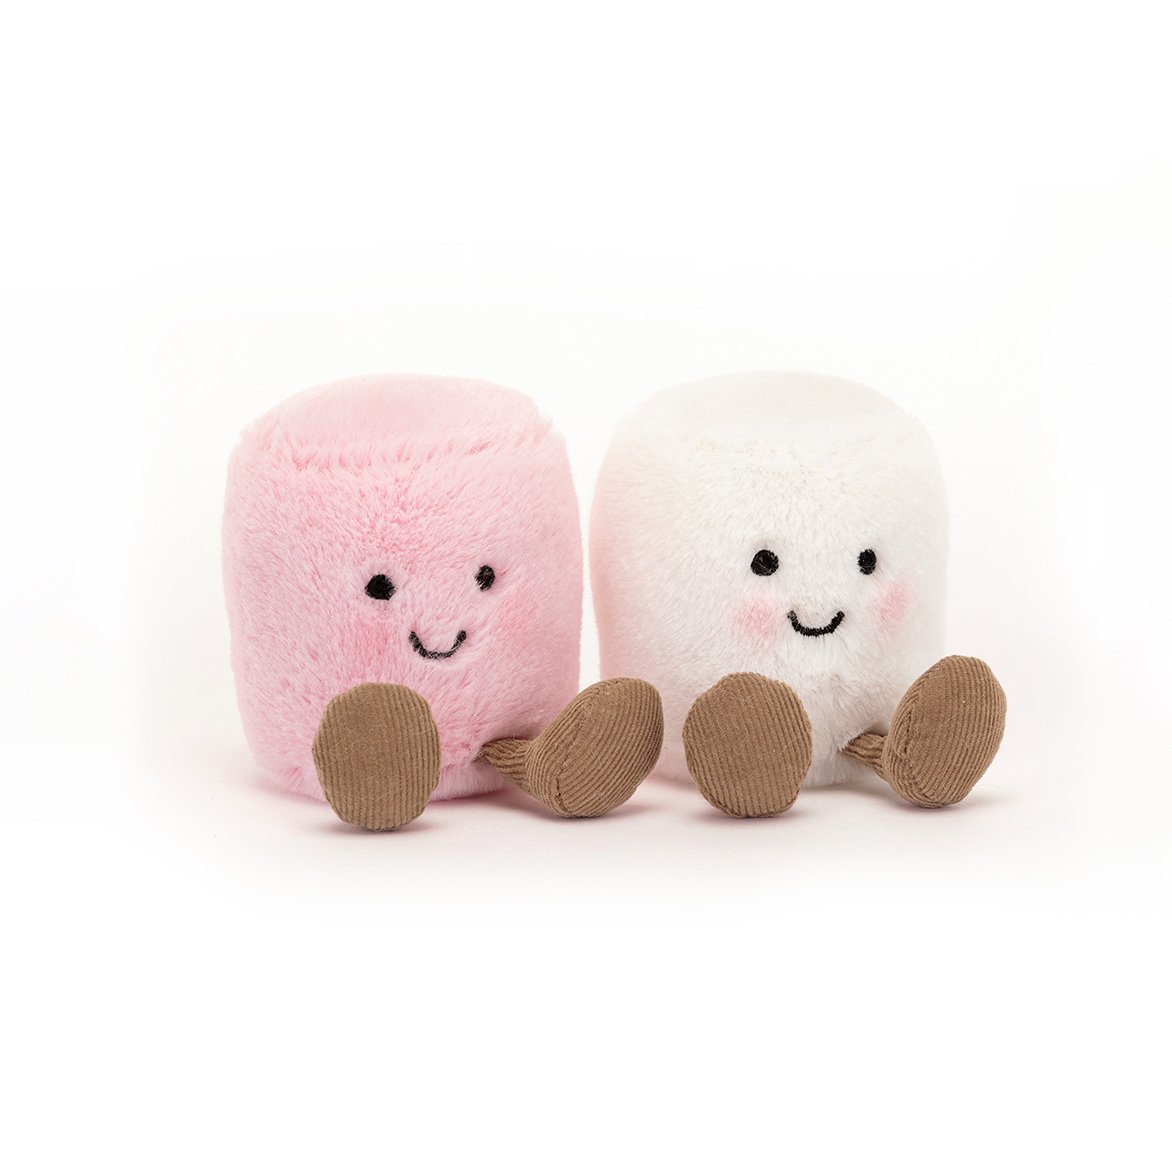 Buy Amuseable Pink and White Marshmallows - at Jellycat.com